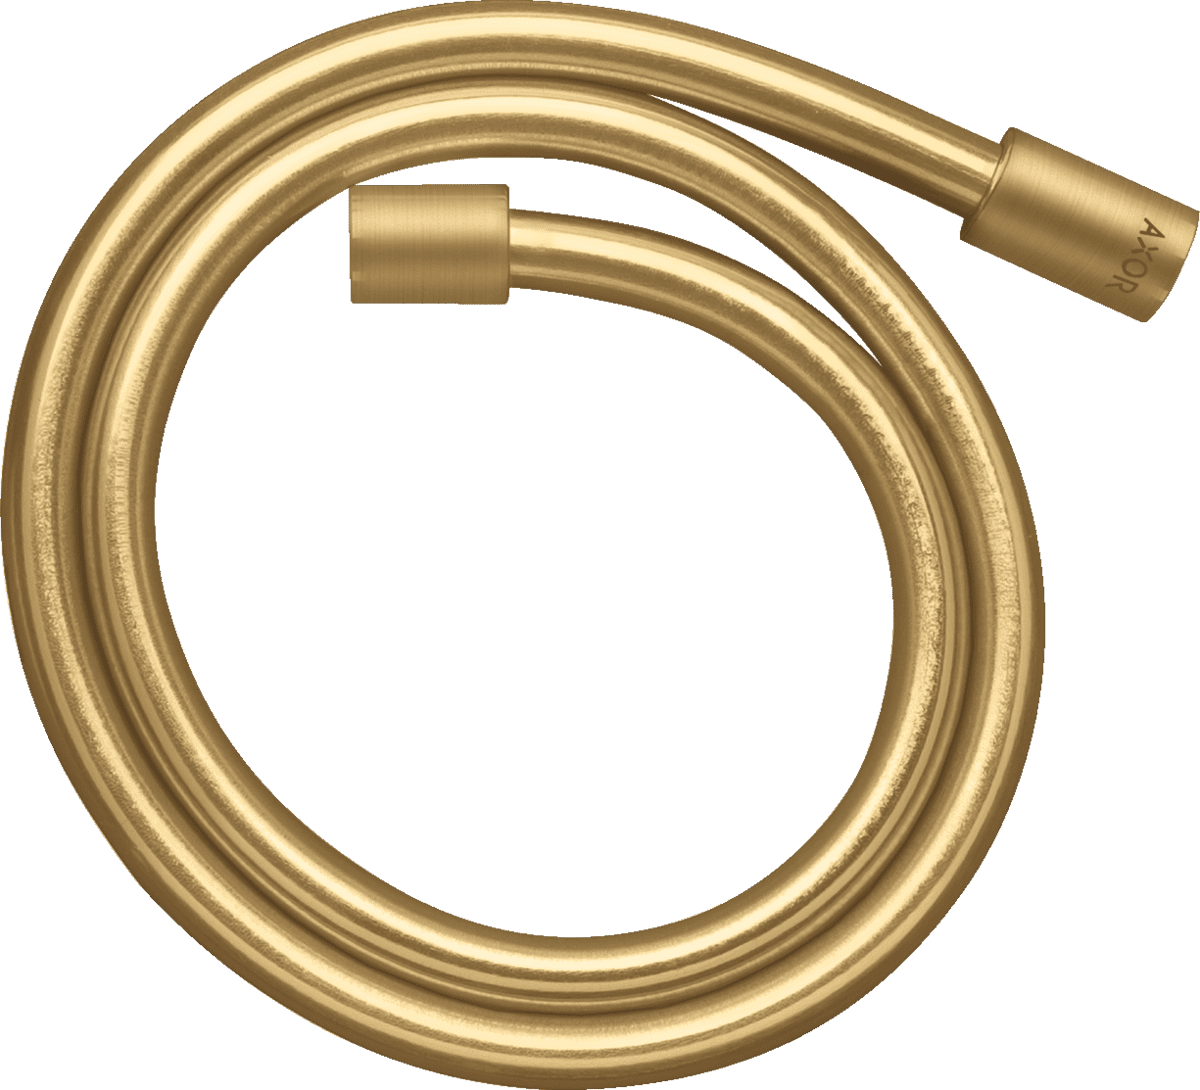 Picture of HANSGROHE AXOR Starck Metal effect shower hose 1.25 m with cylindrical nuts #28282250 - Brushed Gold Optic